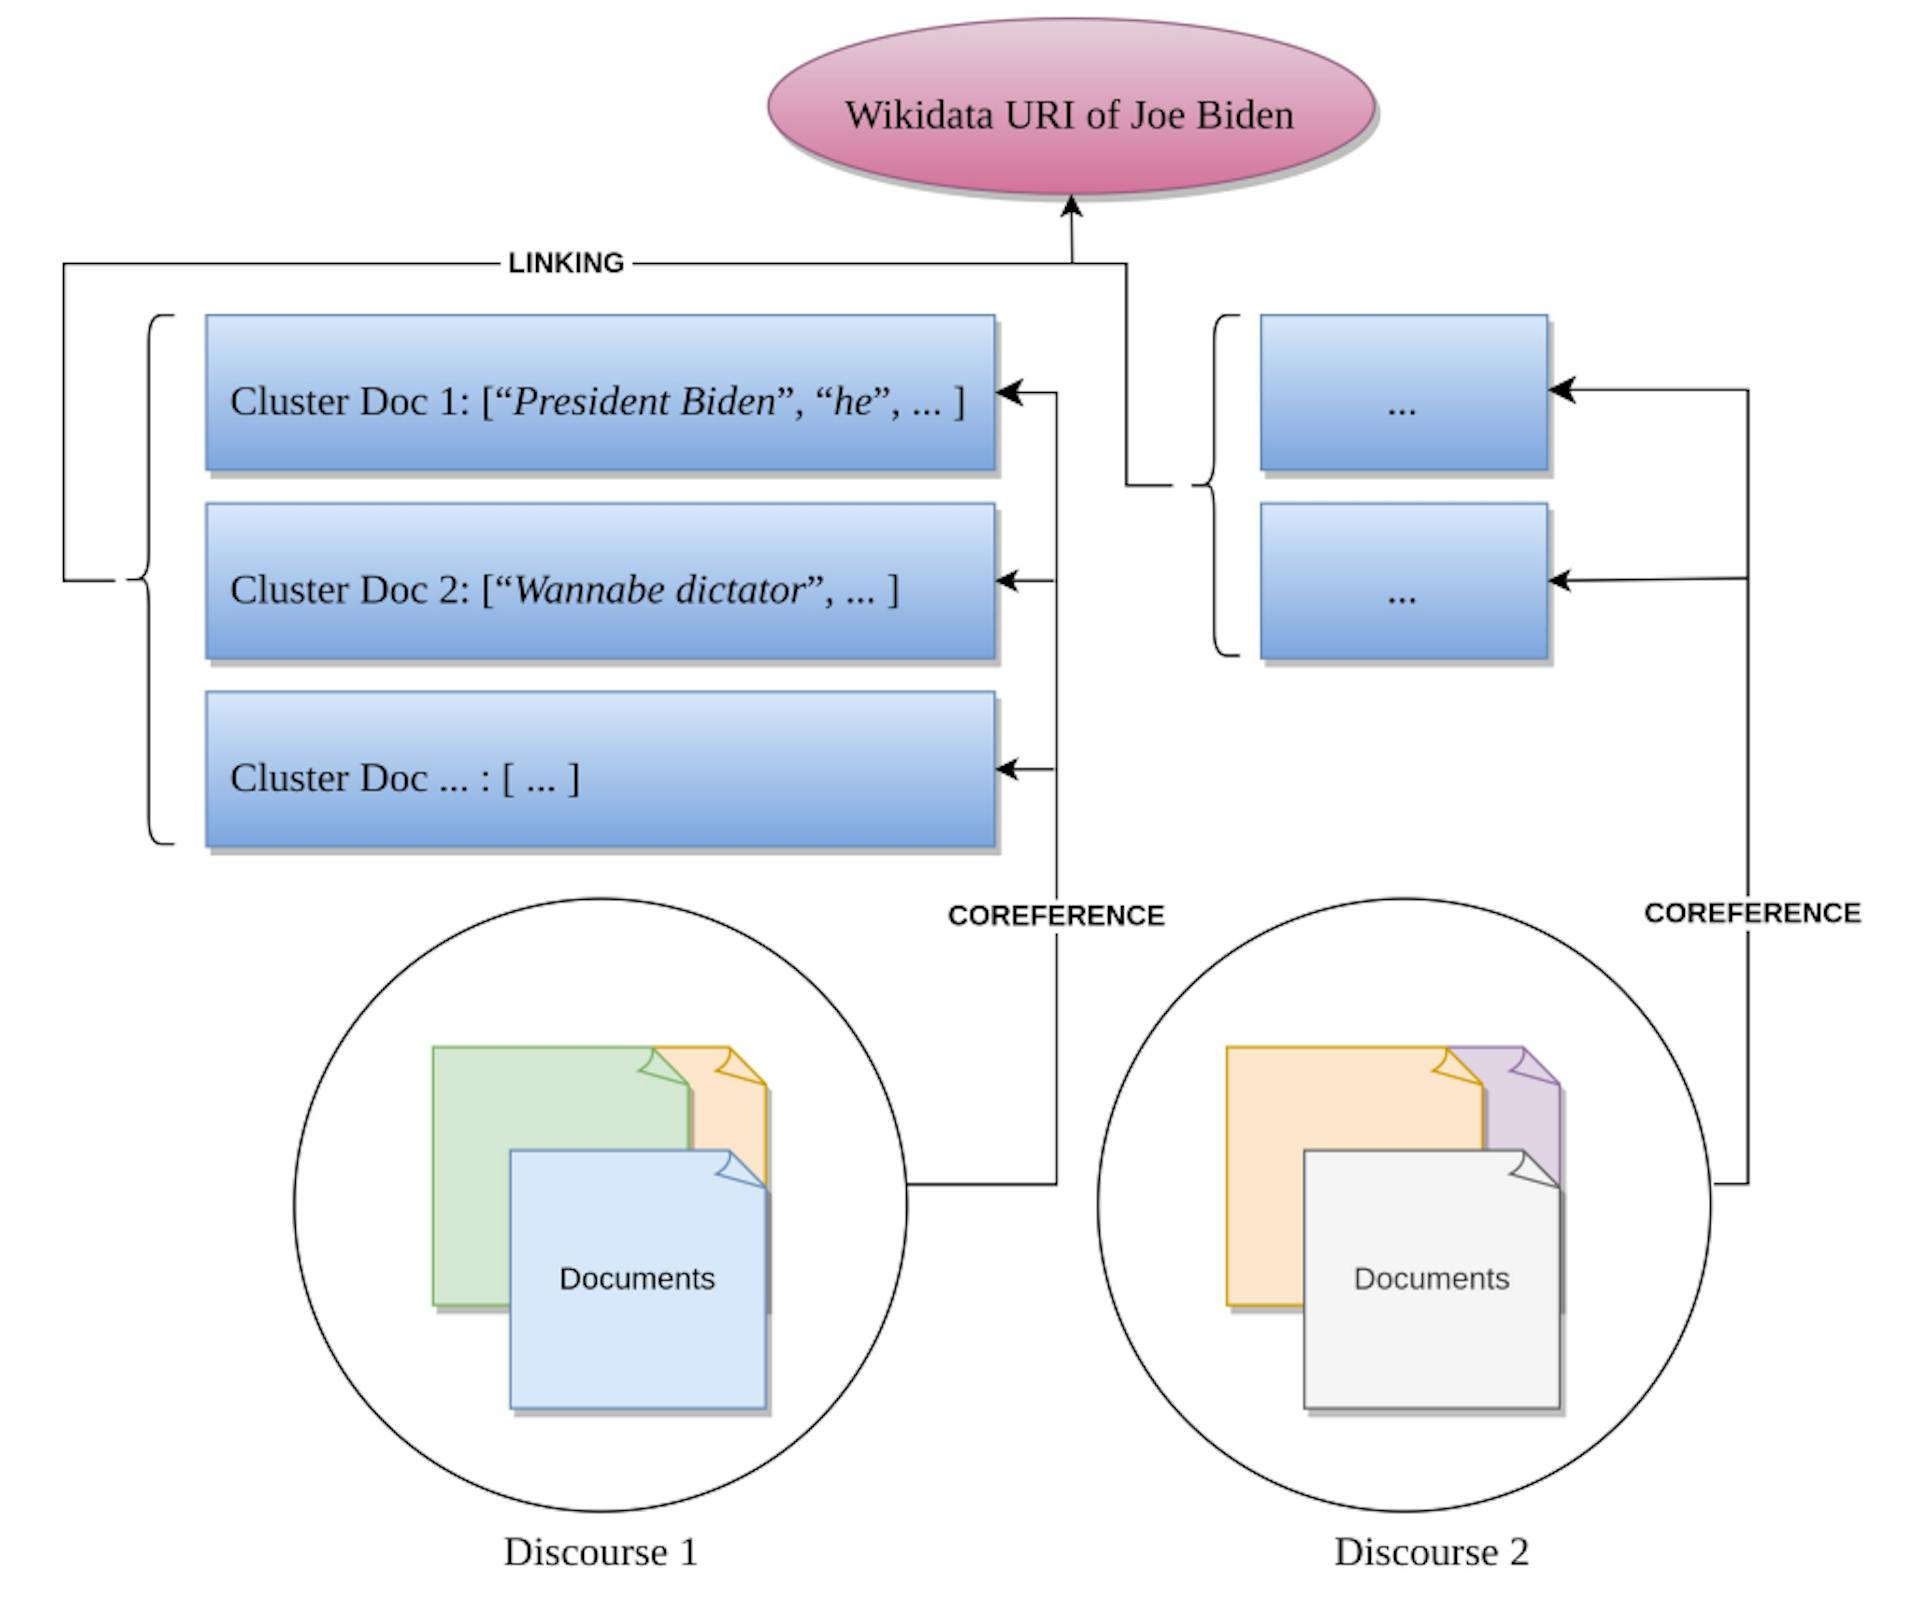 Figure 2: Illustration of our multi-layered annotation: within several discourses which all consist of multiple news articles reporting on the same happening, document entity clusters are extracted for each document. Those clusters are assigned a Wikidata URI. This ensures an unambiguous identification of each cluster, but it also links each cluster to all other clusters with the same referent within one discourse as well as across discourses. Finally, the linking also adds world knowledge to the annotated data.